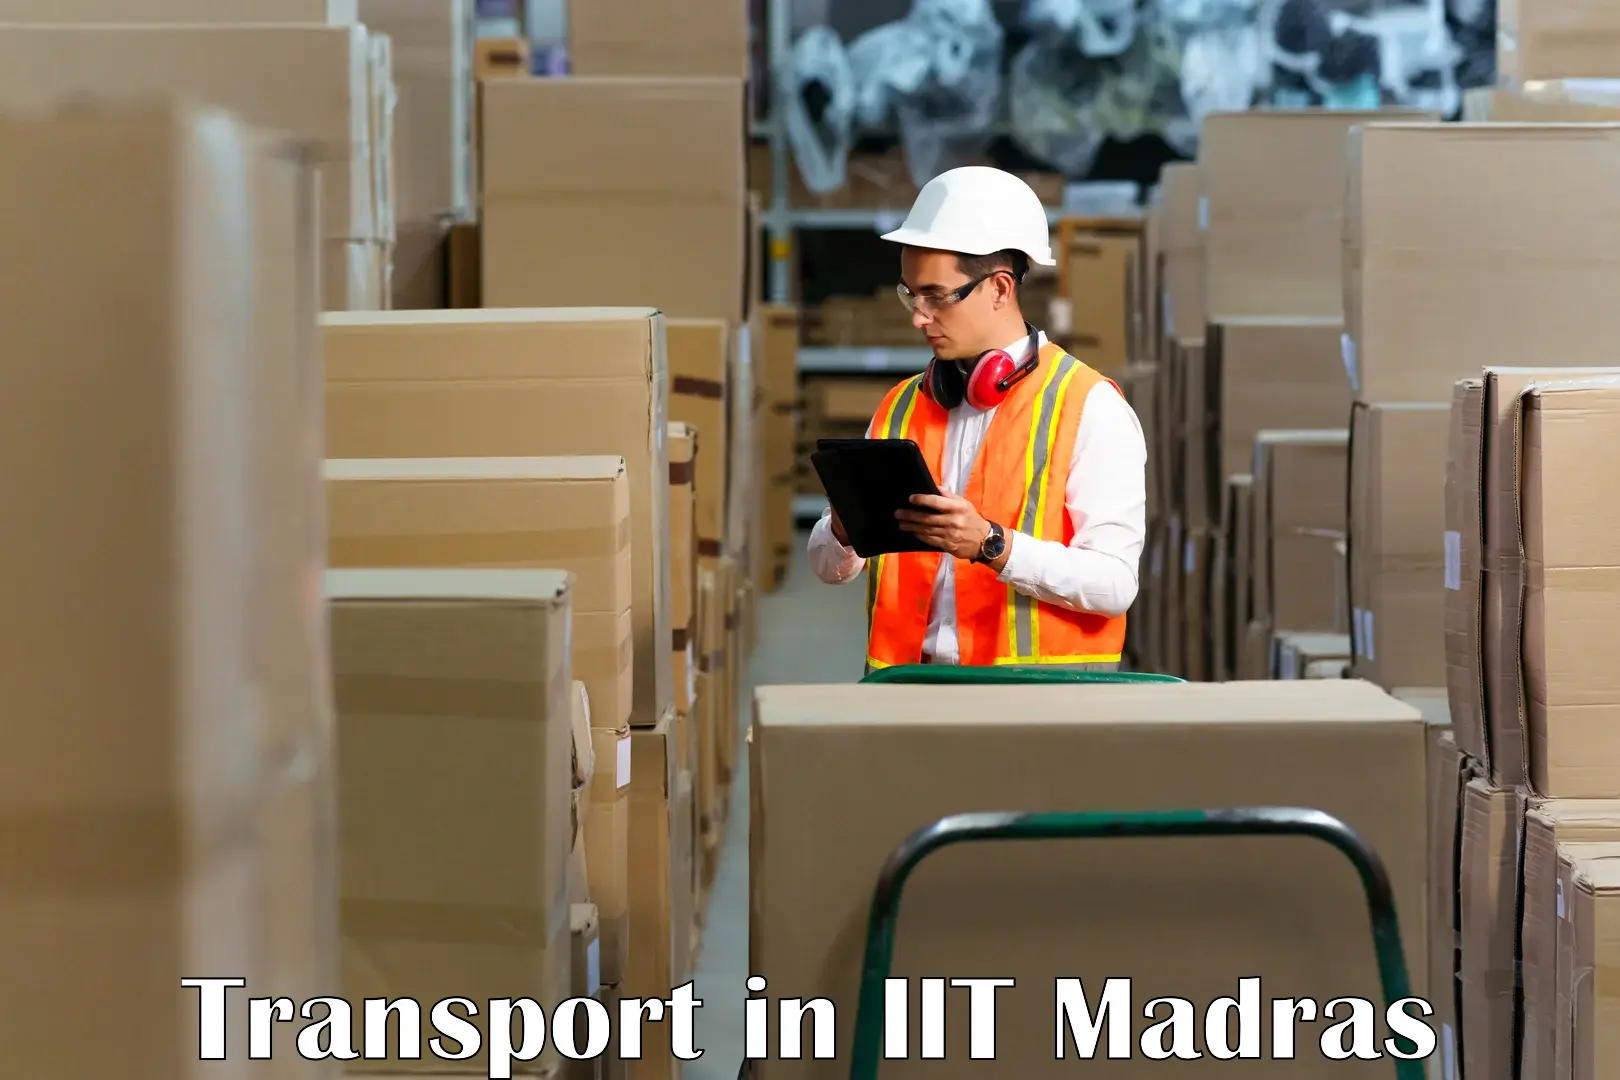 Container transportation services in IIT Madras